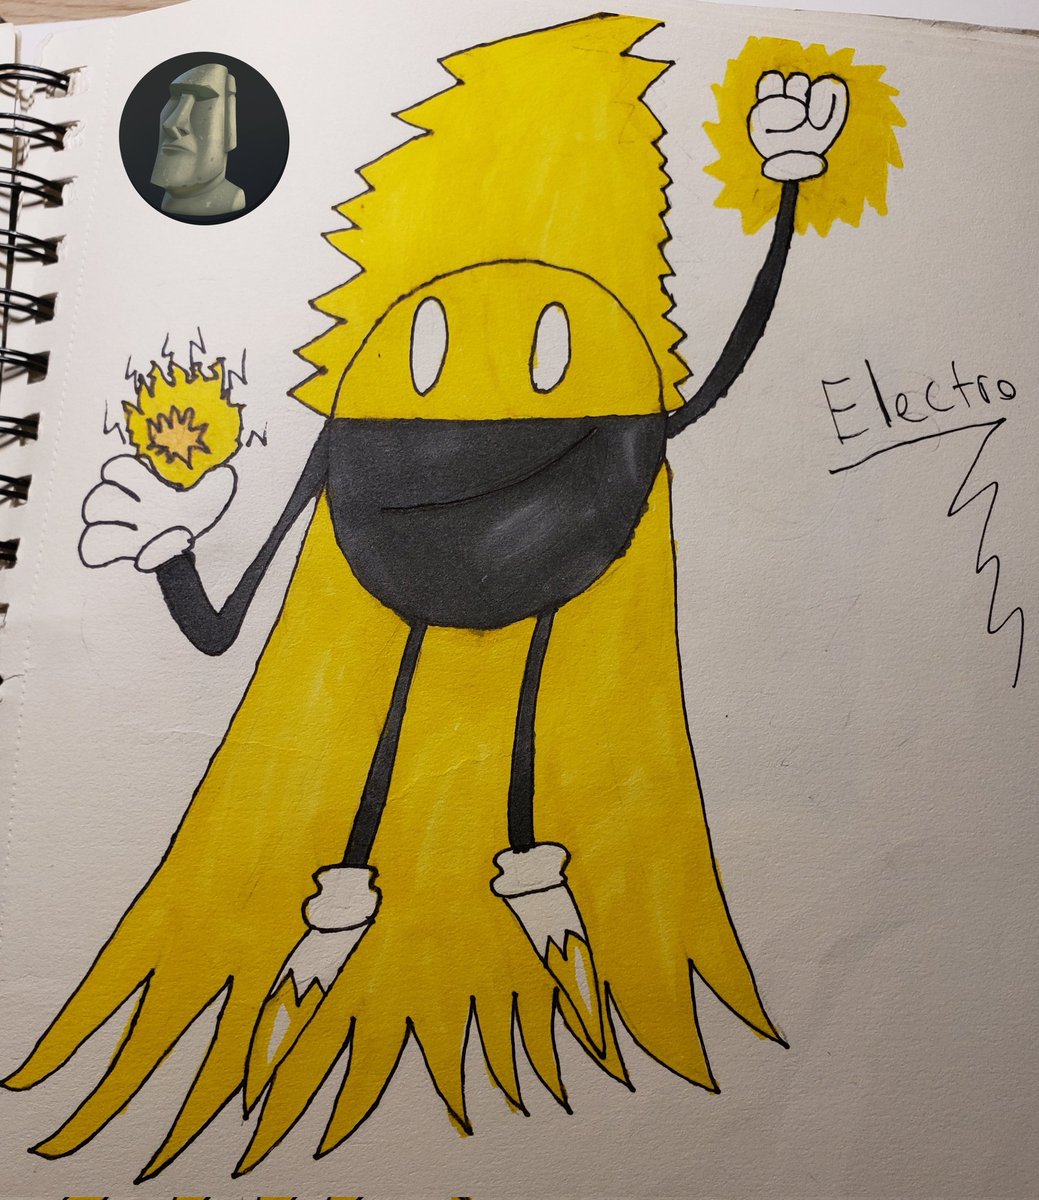 OC Redesigns: Electro, Jumper, and Raket

Original designs in pictures 2-4 (from 6th grade) 